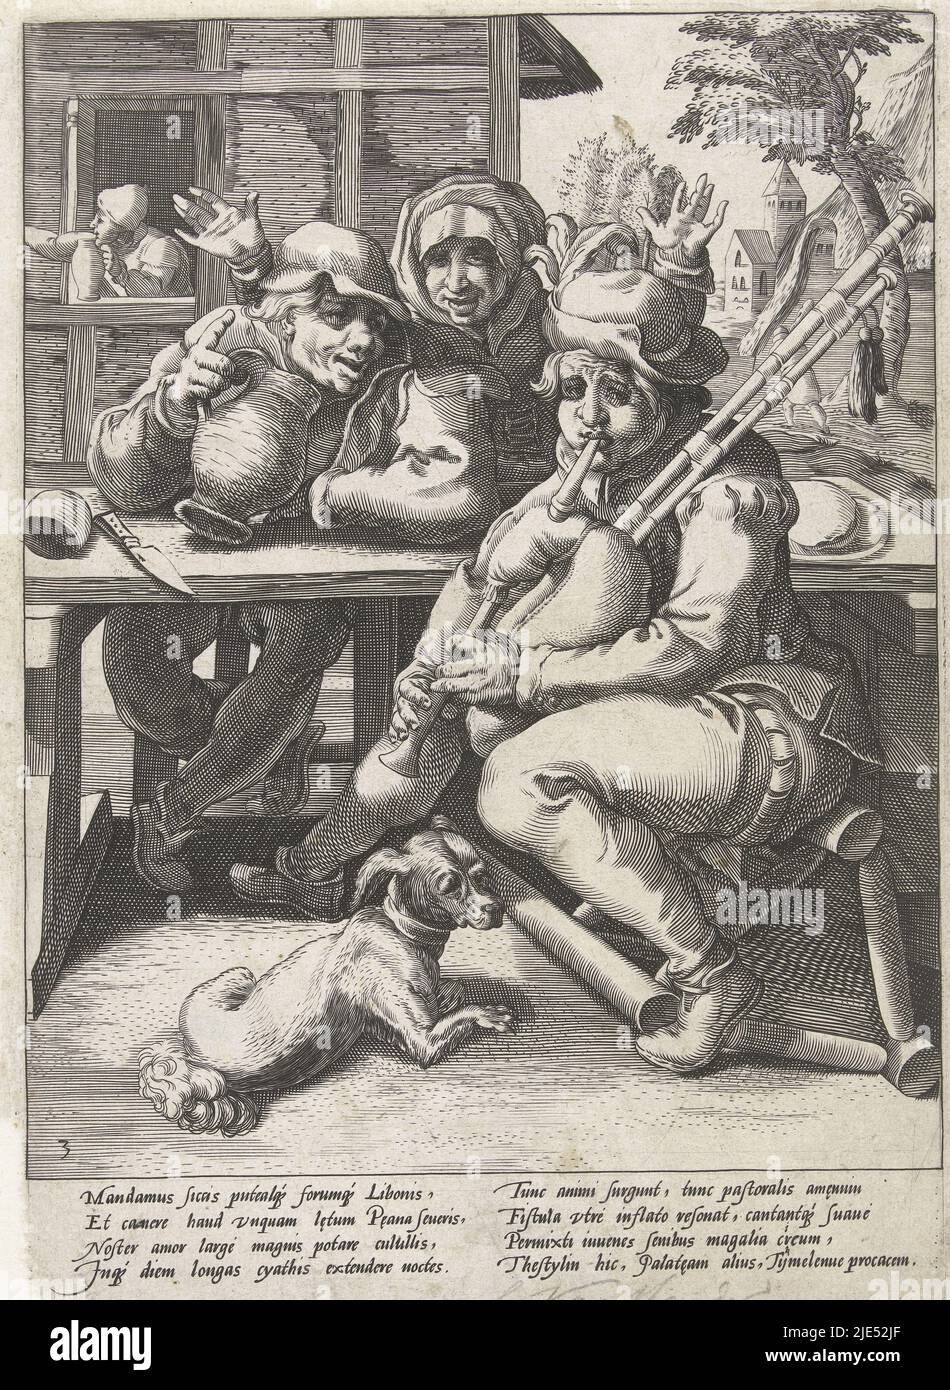 A bagpipe player and a drunkard sit together at the table. Behind the table is a woman with her hands raised. The bagpiper sits on a fallen chair, next to him sits a little dog. Below the performance an explanatory Latin verse by Franco Estius and a Dutch verse, The bagpipe gives no sound, than when it is full The drinker and the bagpipe player Proverbs after Karel van Mander (series title)., print maker: Hendrick Goltzius, (attributed to workshop of), Karel van Mander (I), Franco Estius, Haarlem, 1590 - 1594, paper, engraving, letterpress printing, h 265 mm × w 185 mm Stock Photo